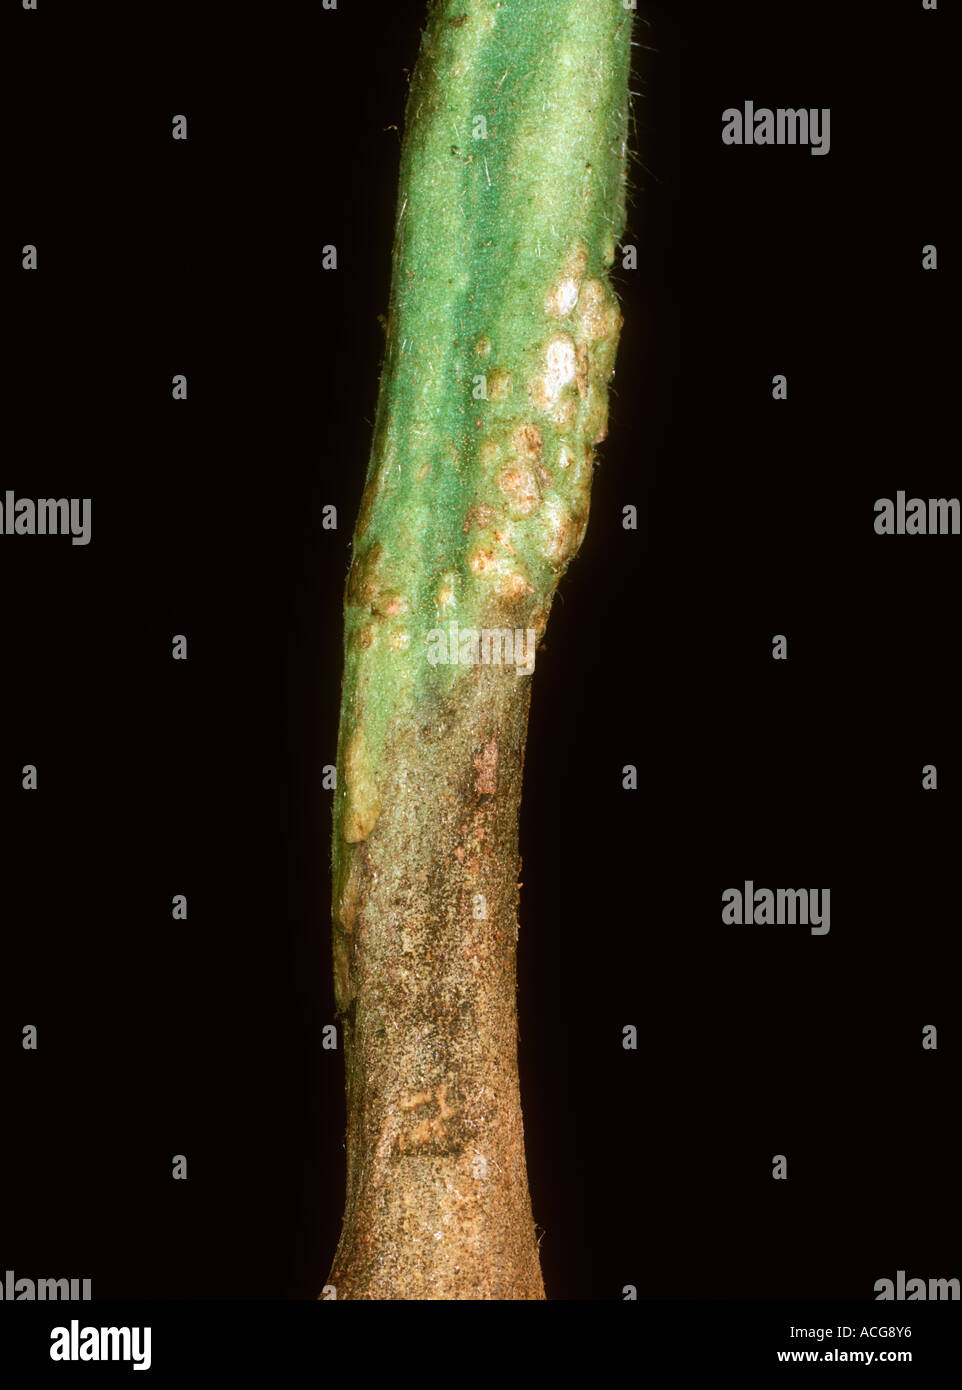 Stem rot Didymella lycopersici lesion and adventitious roots developing Stock Photo